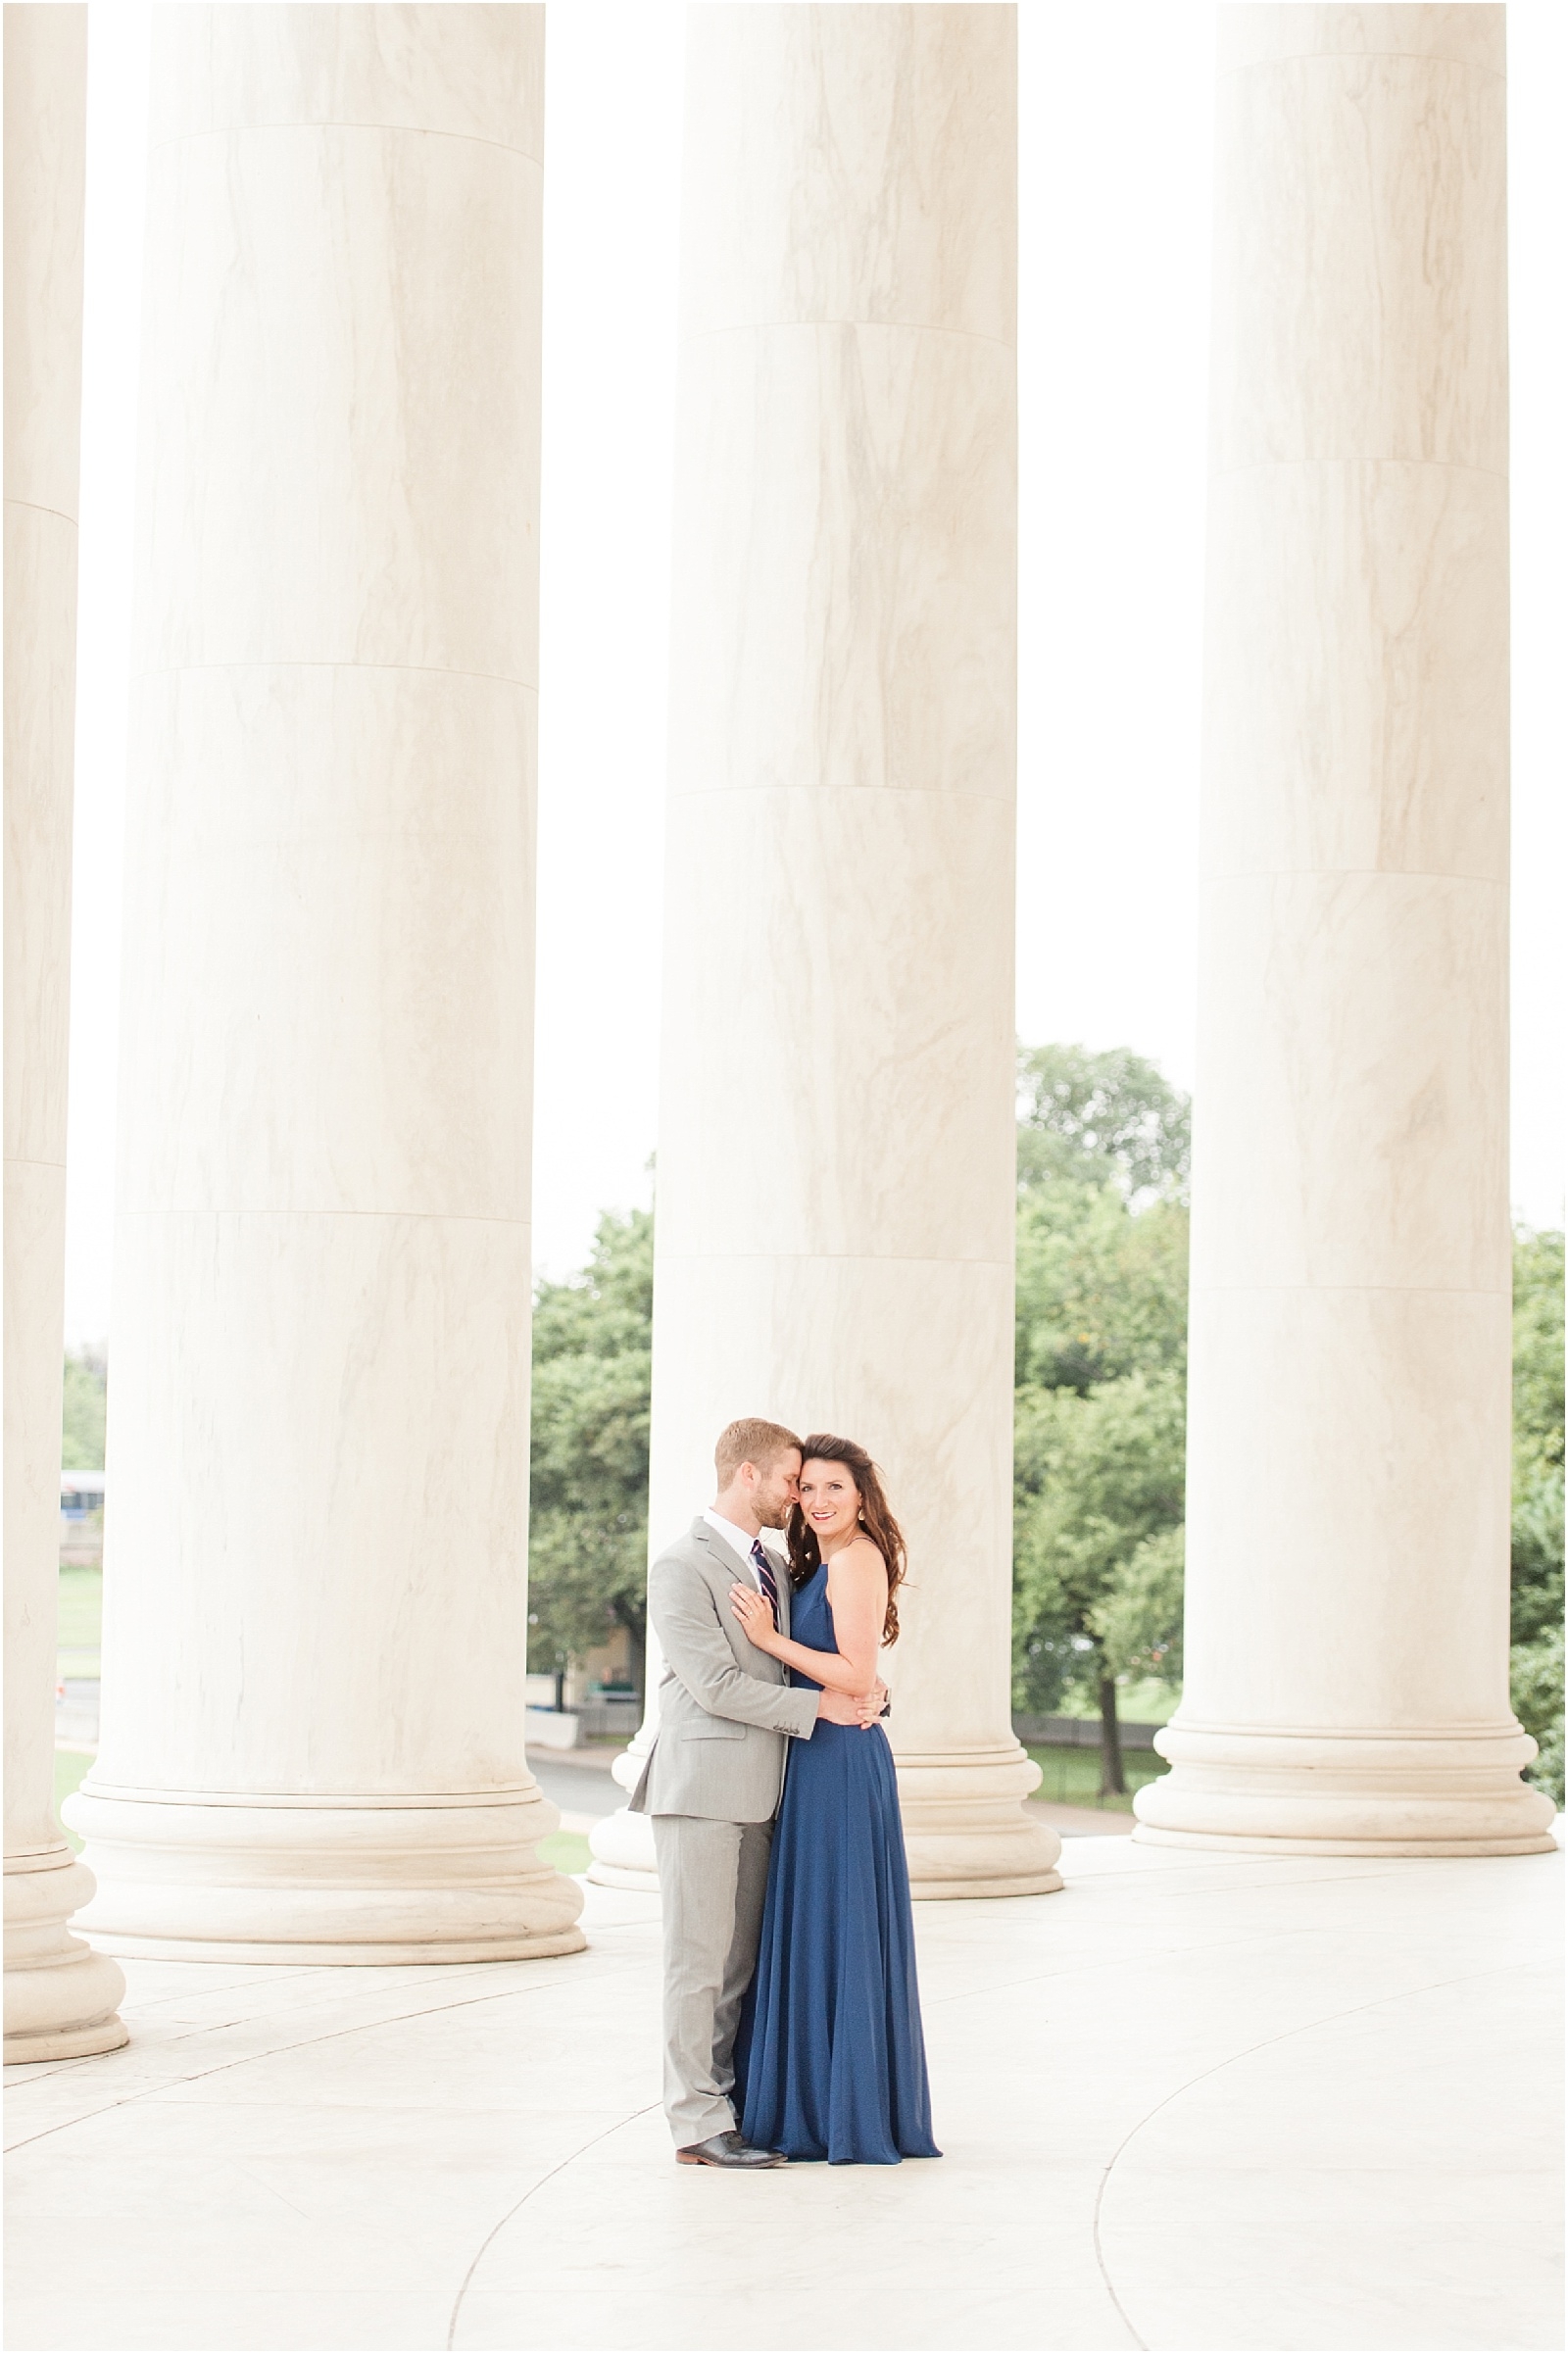 0014 Bret and Brandie Photography| Washington DC Engagement | Megan and Connor.jpg